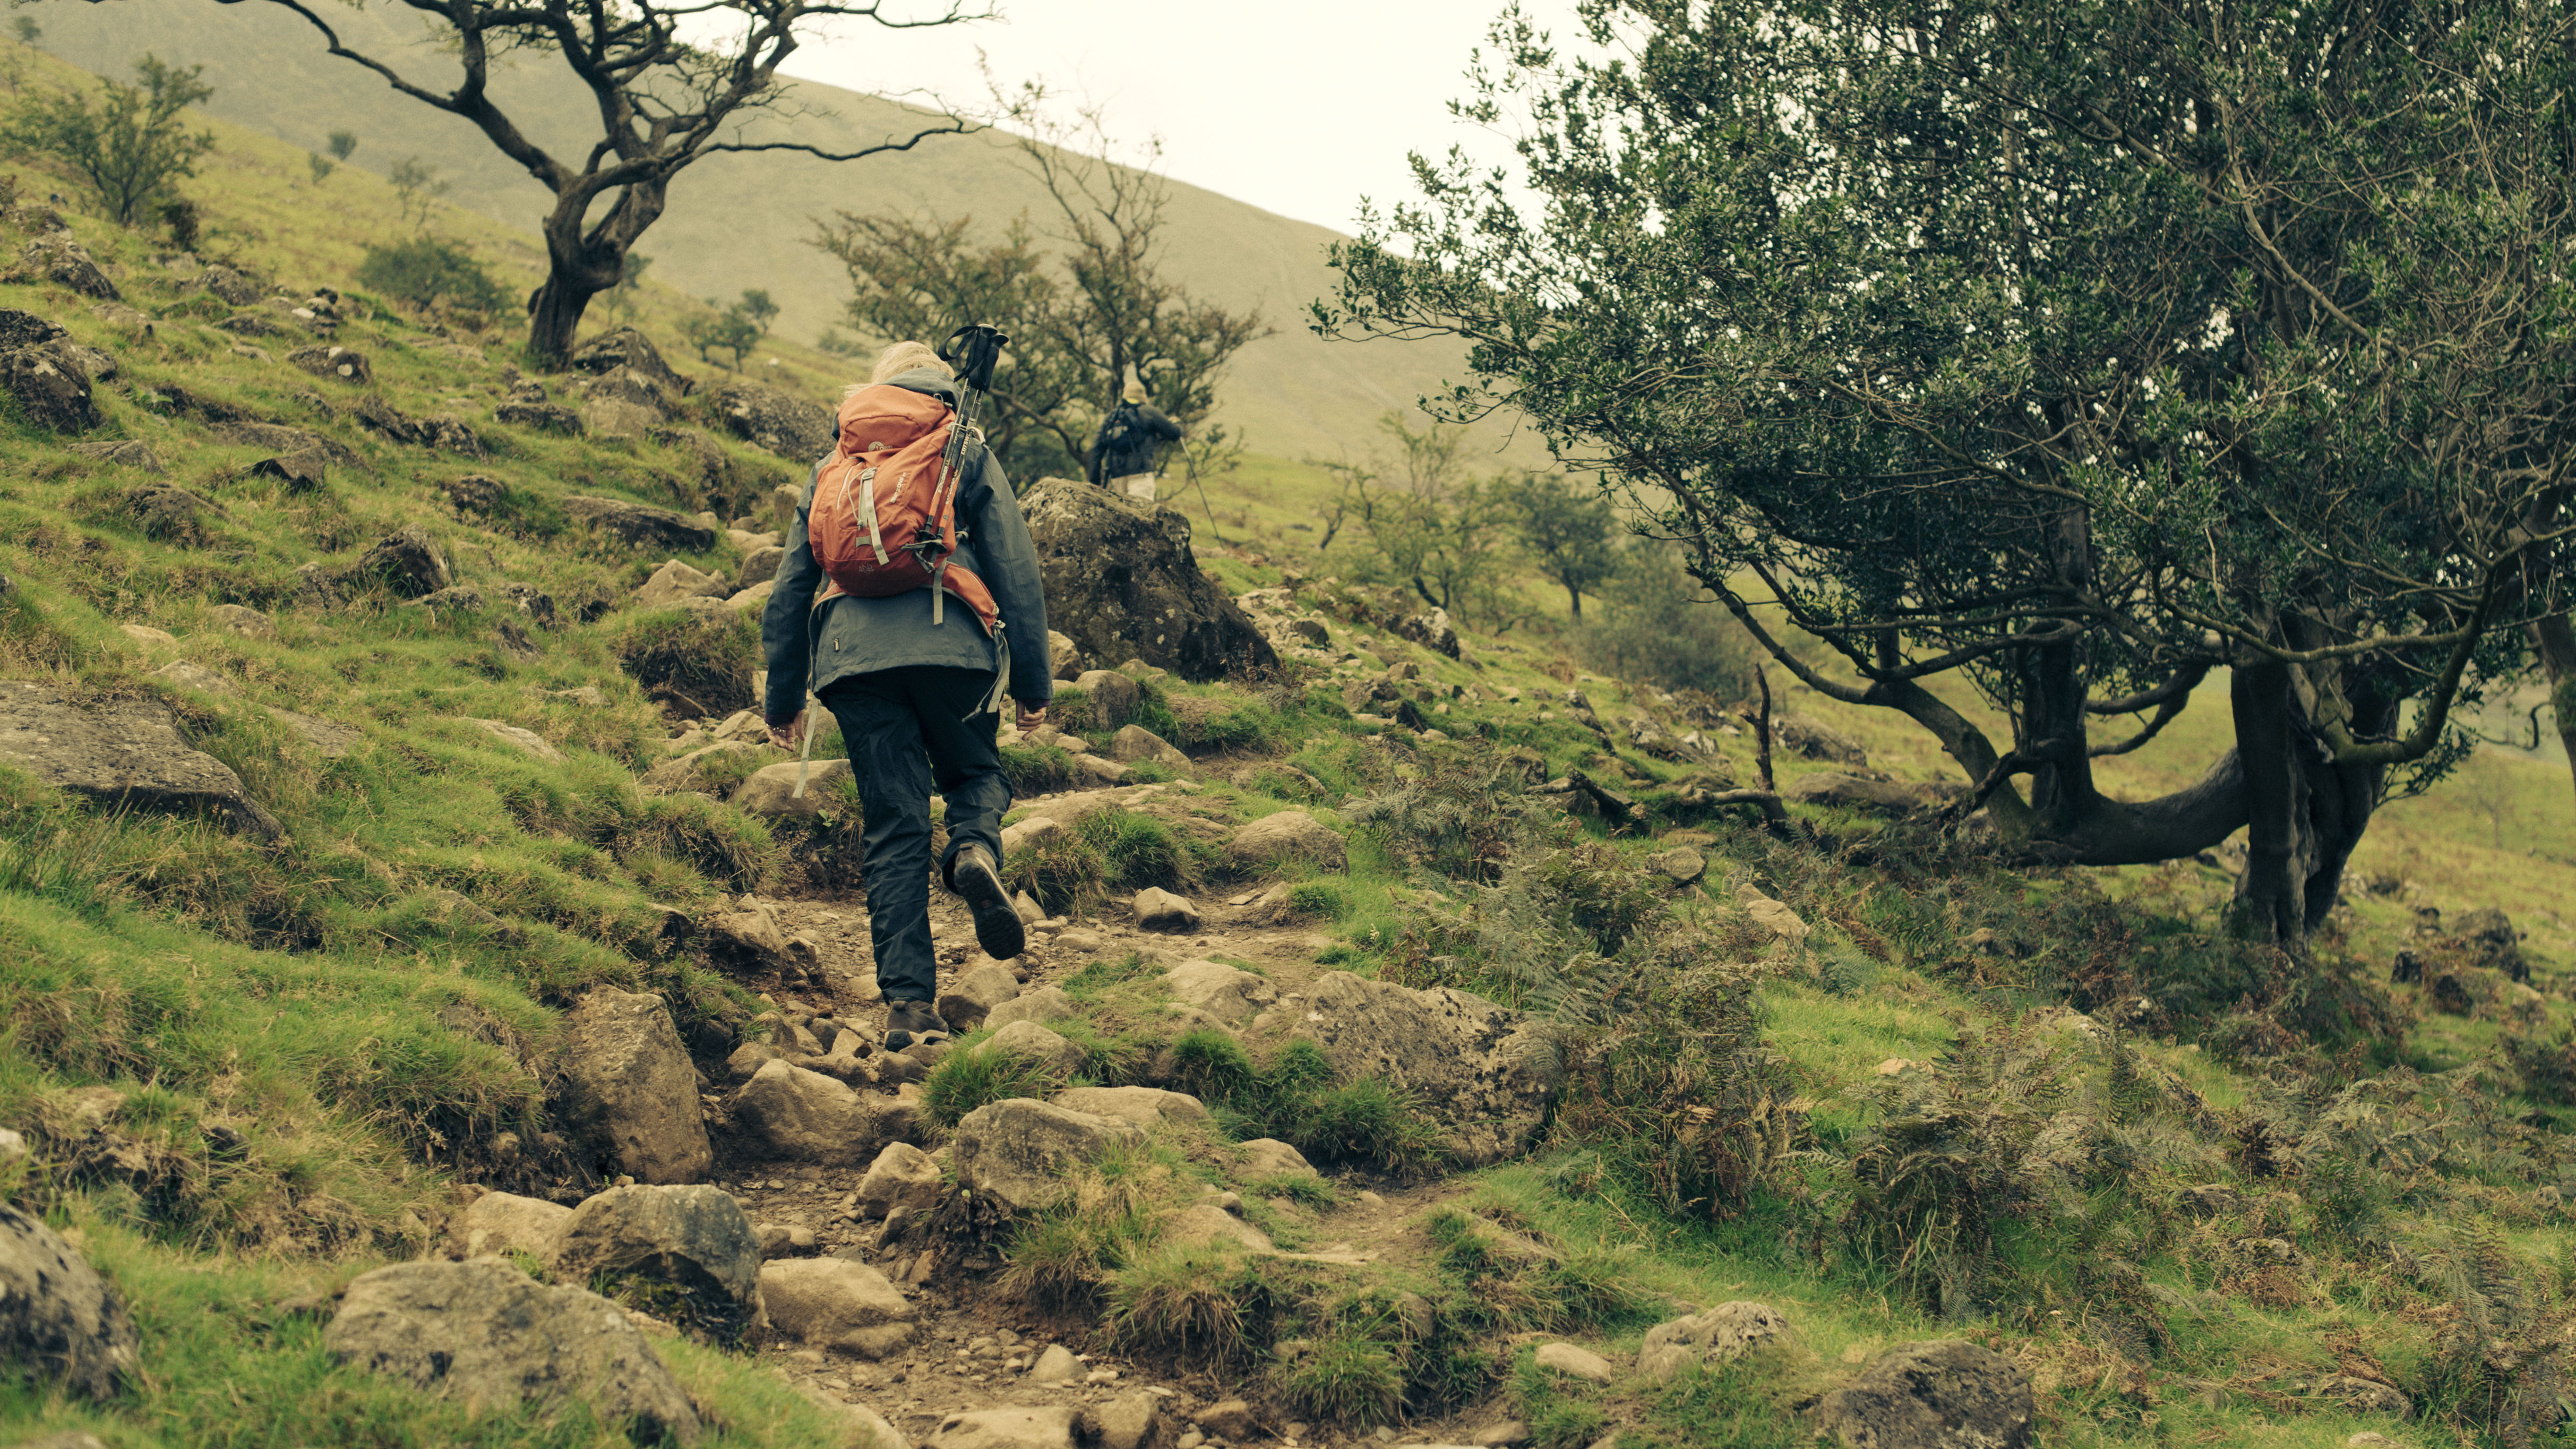 The image shows a person hiking on rough terrain